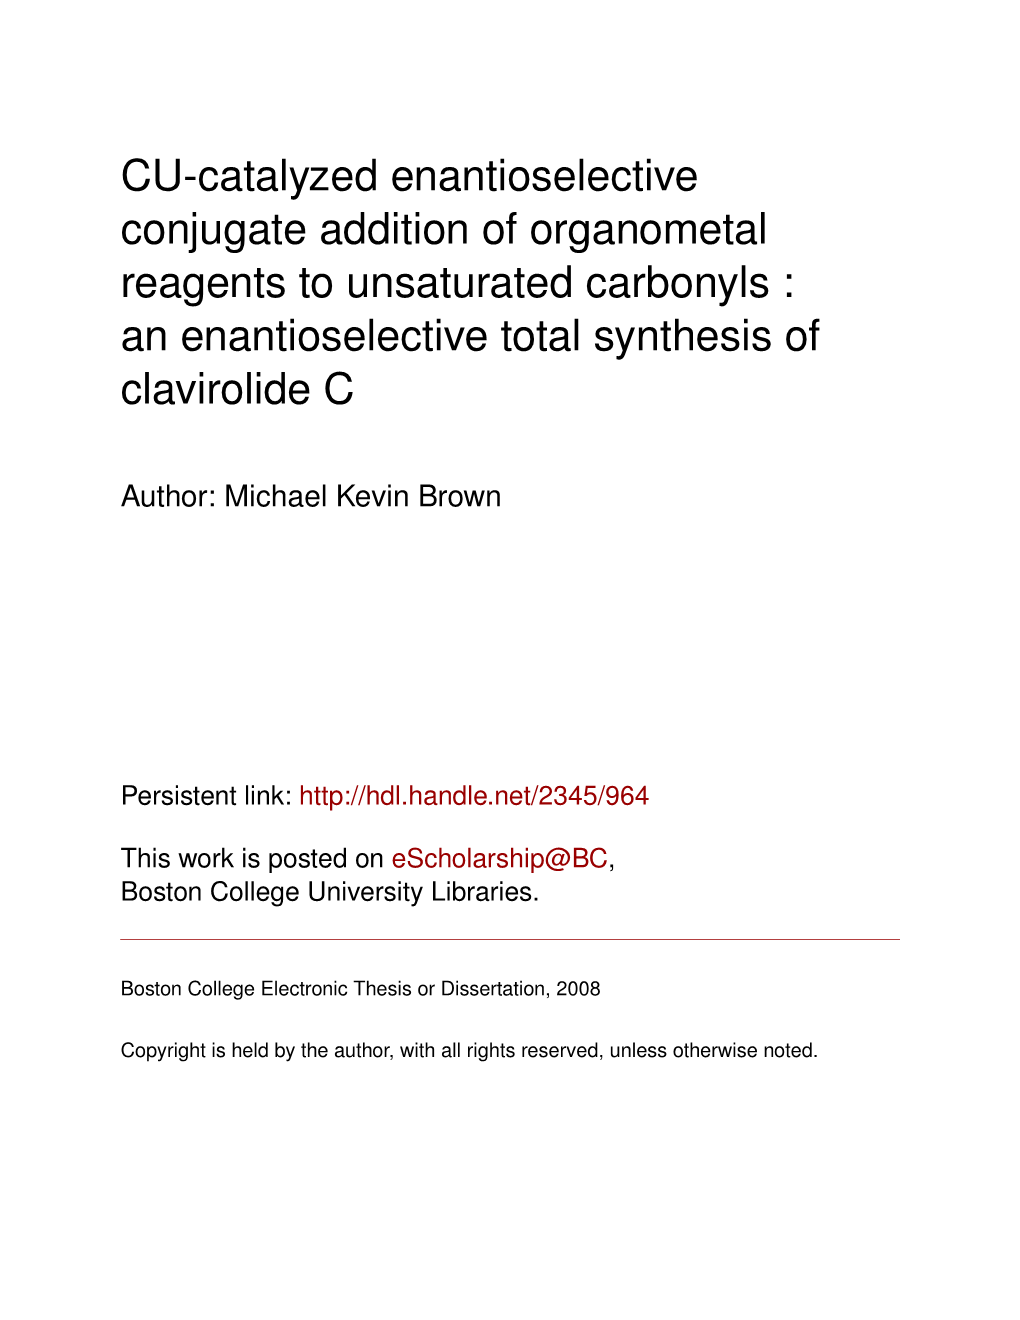 CU-Catalyzed Enantioselective Conjugate Addition of Organometal Reagents to Unsaturated Carbonyls : an Enantioselective Total Synthesis of Clavirolide C